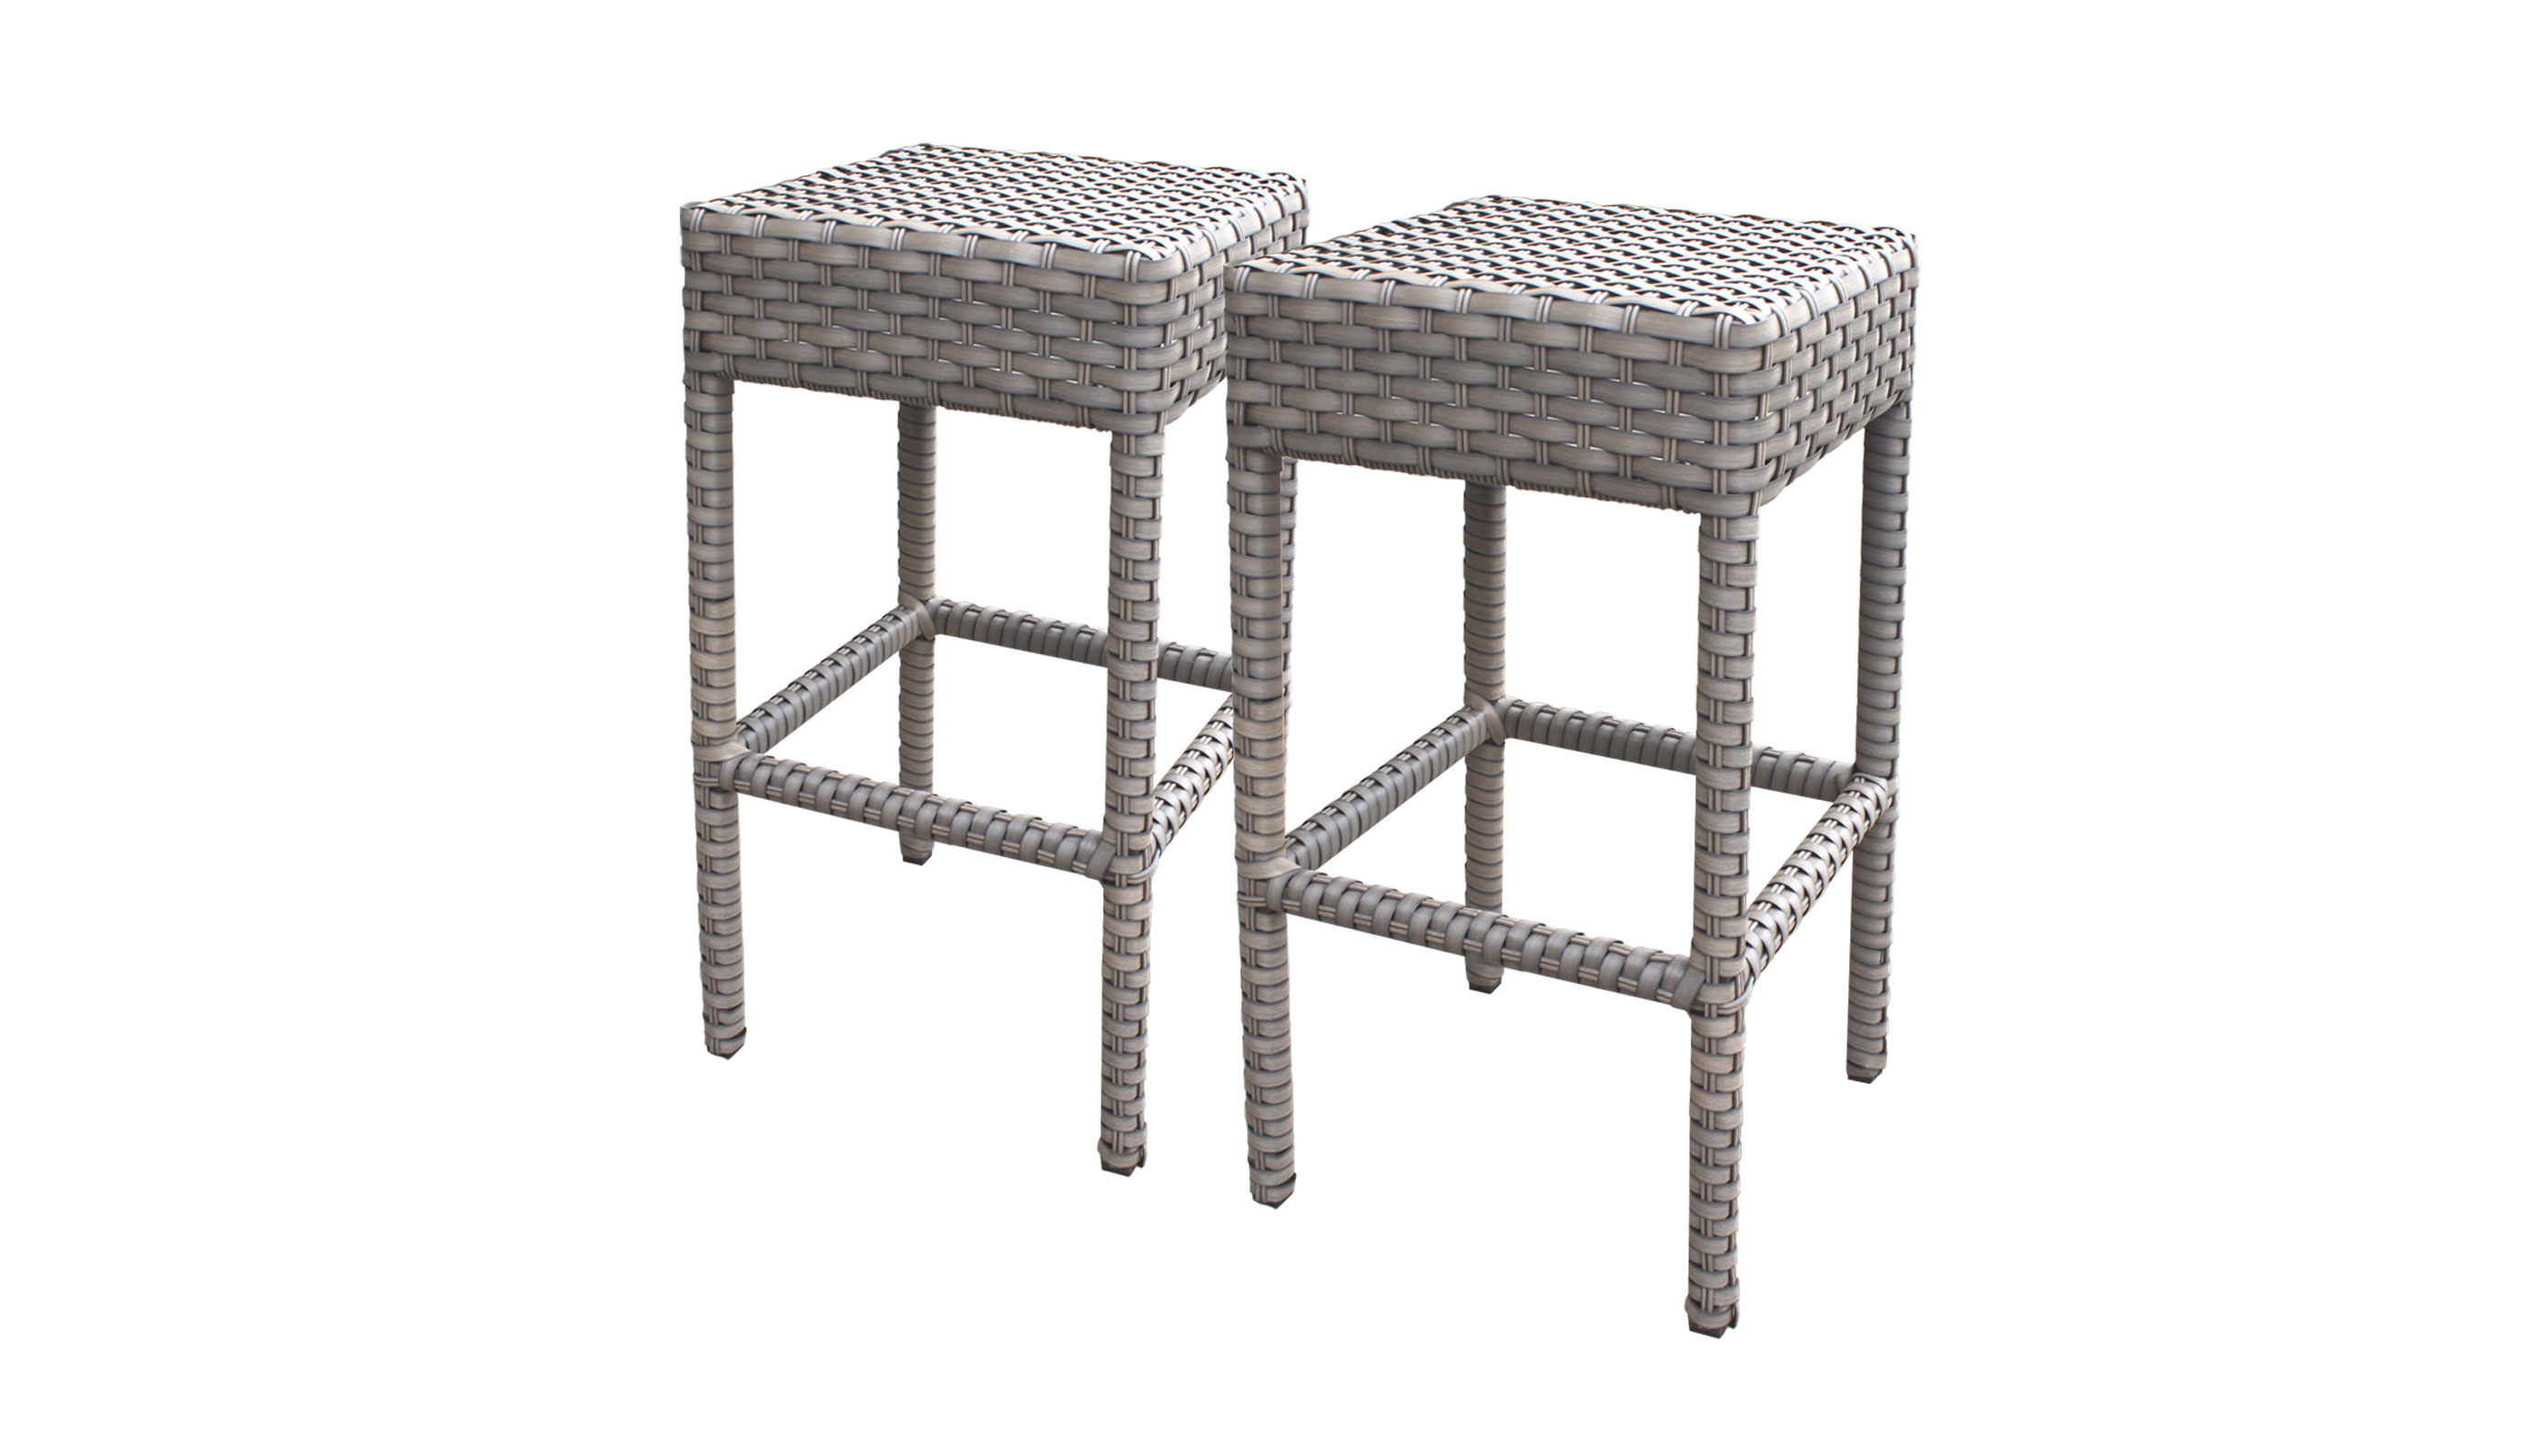 TK Classics 5 Piece Table Set with Backless Barstools Outdoor Wicker Patio Furniture 